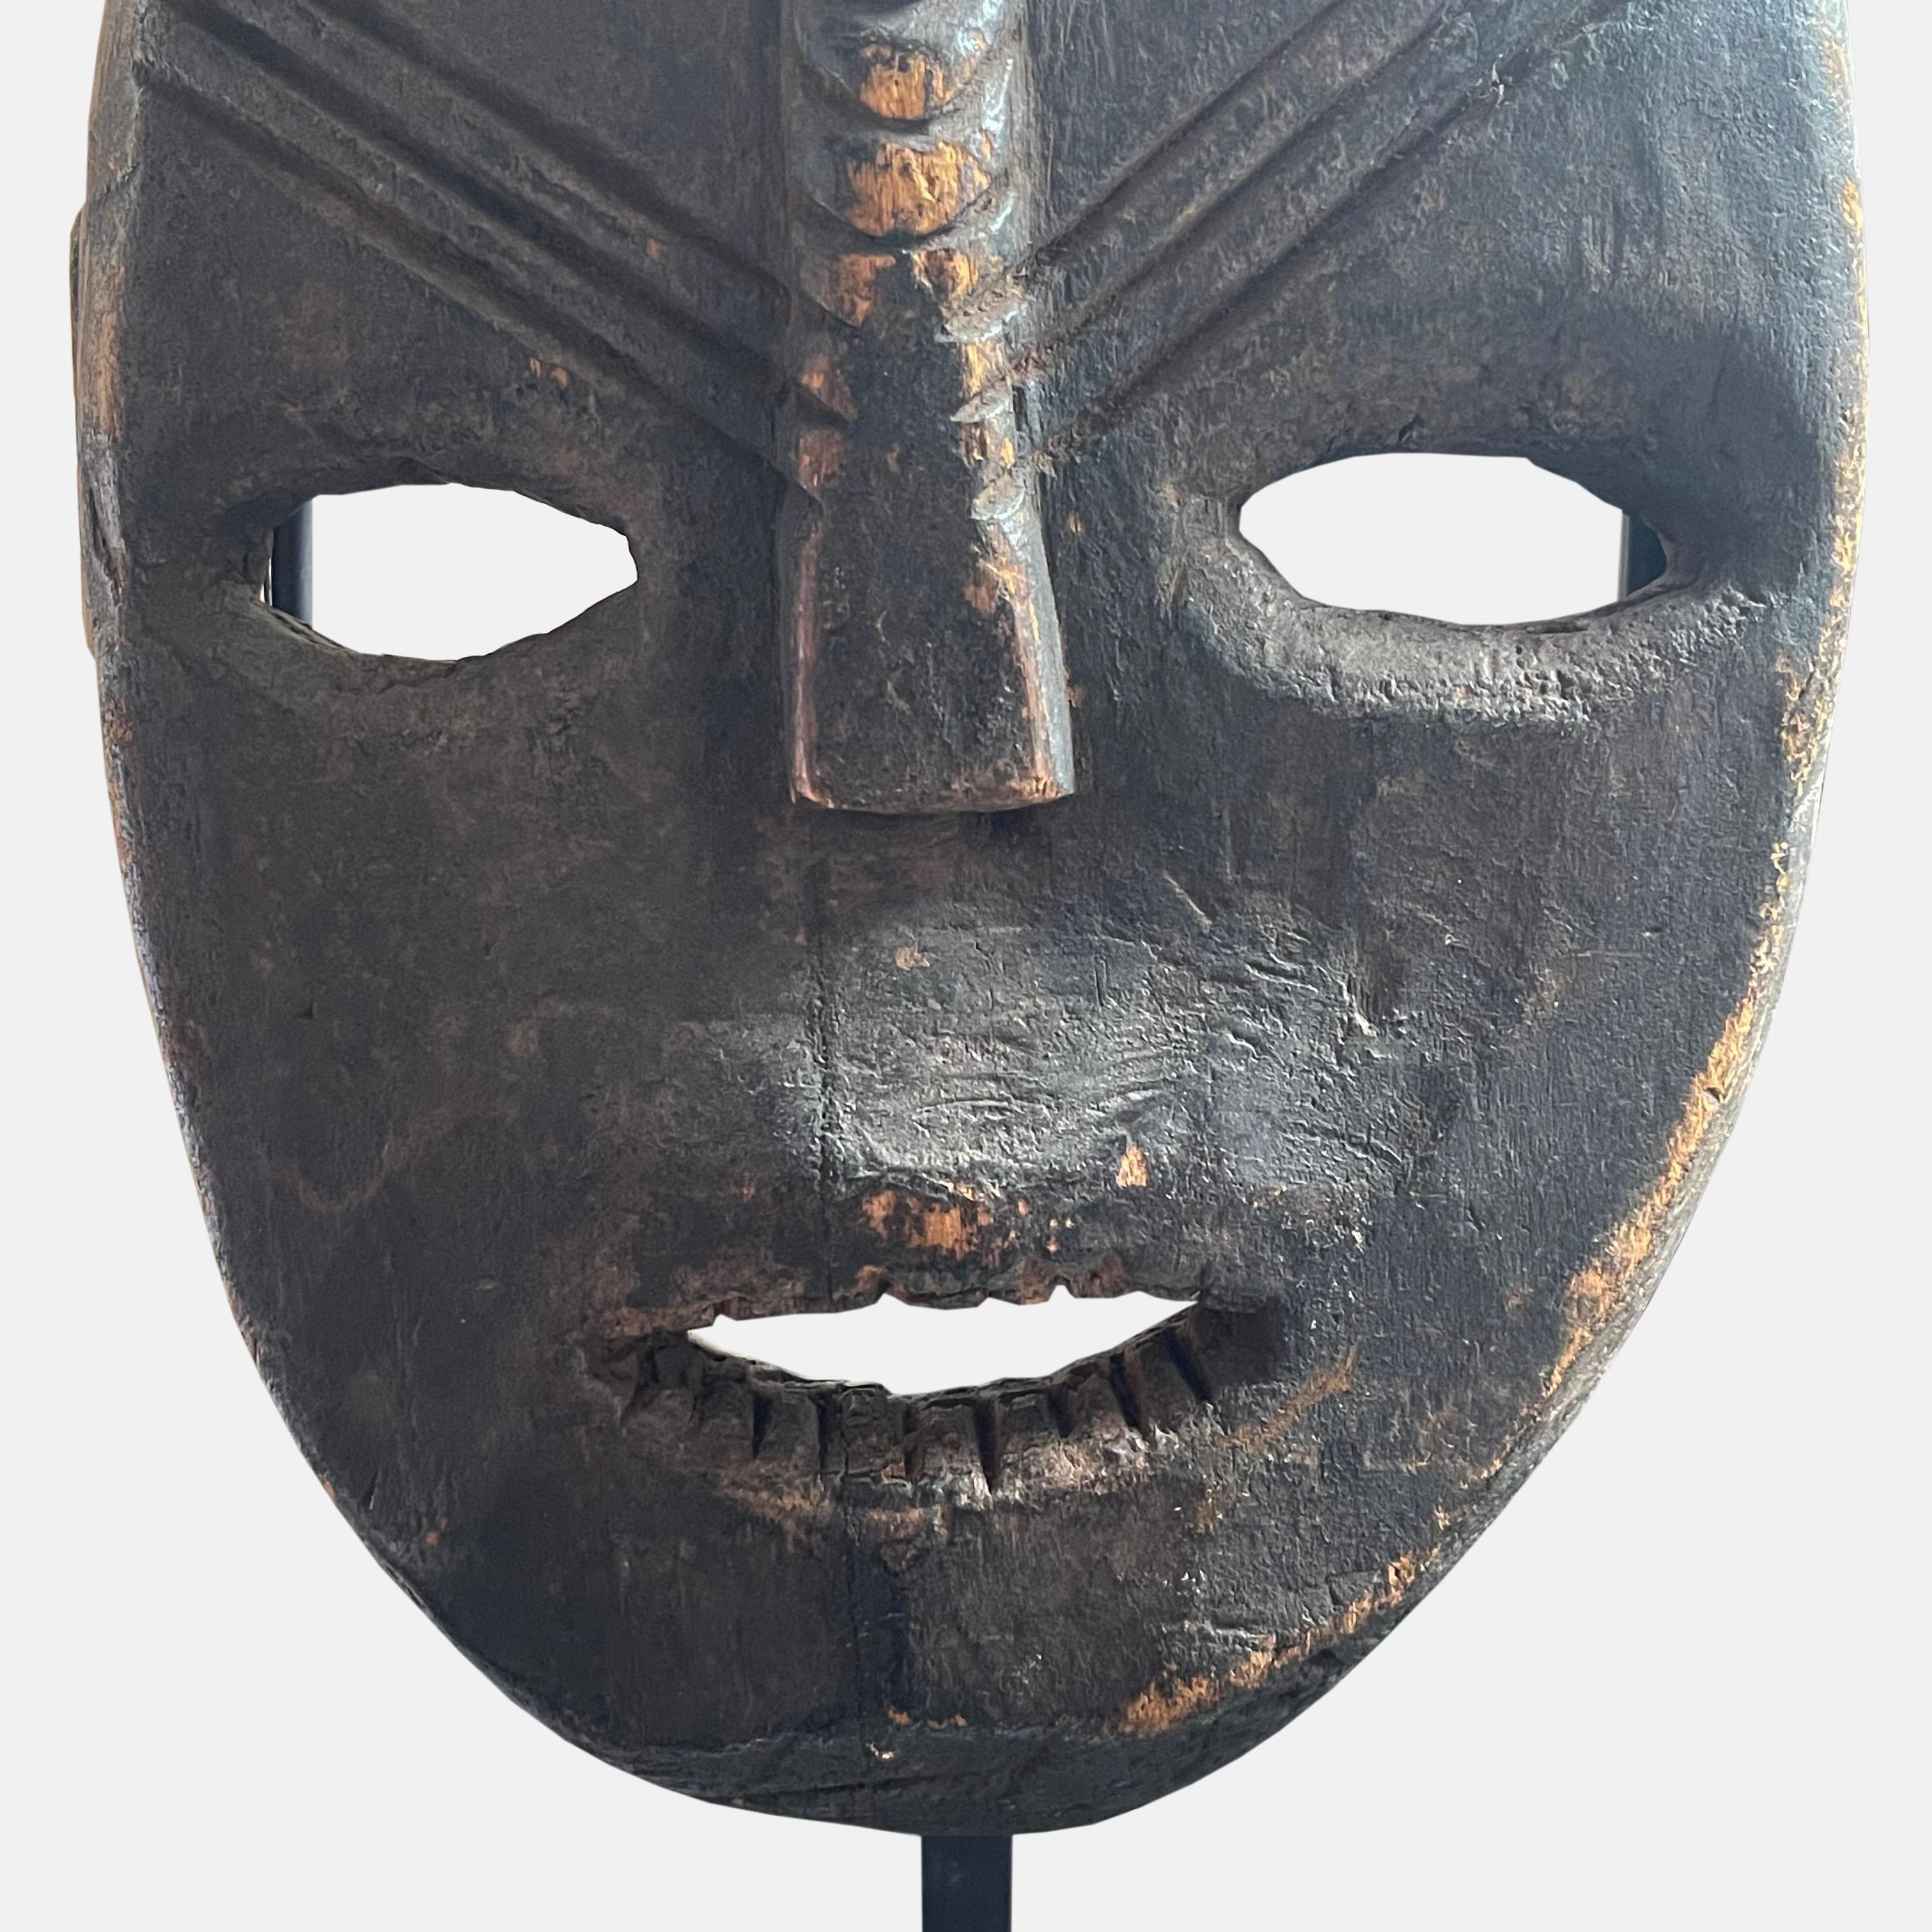 Ngbaka Congolese Tribal Mask for Initiation Rituals, Early 20th Century For Sale 2